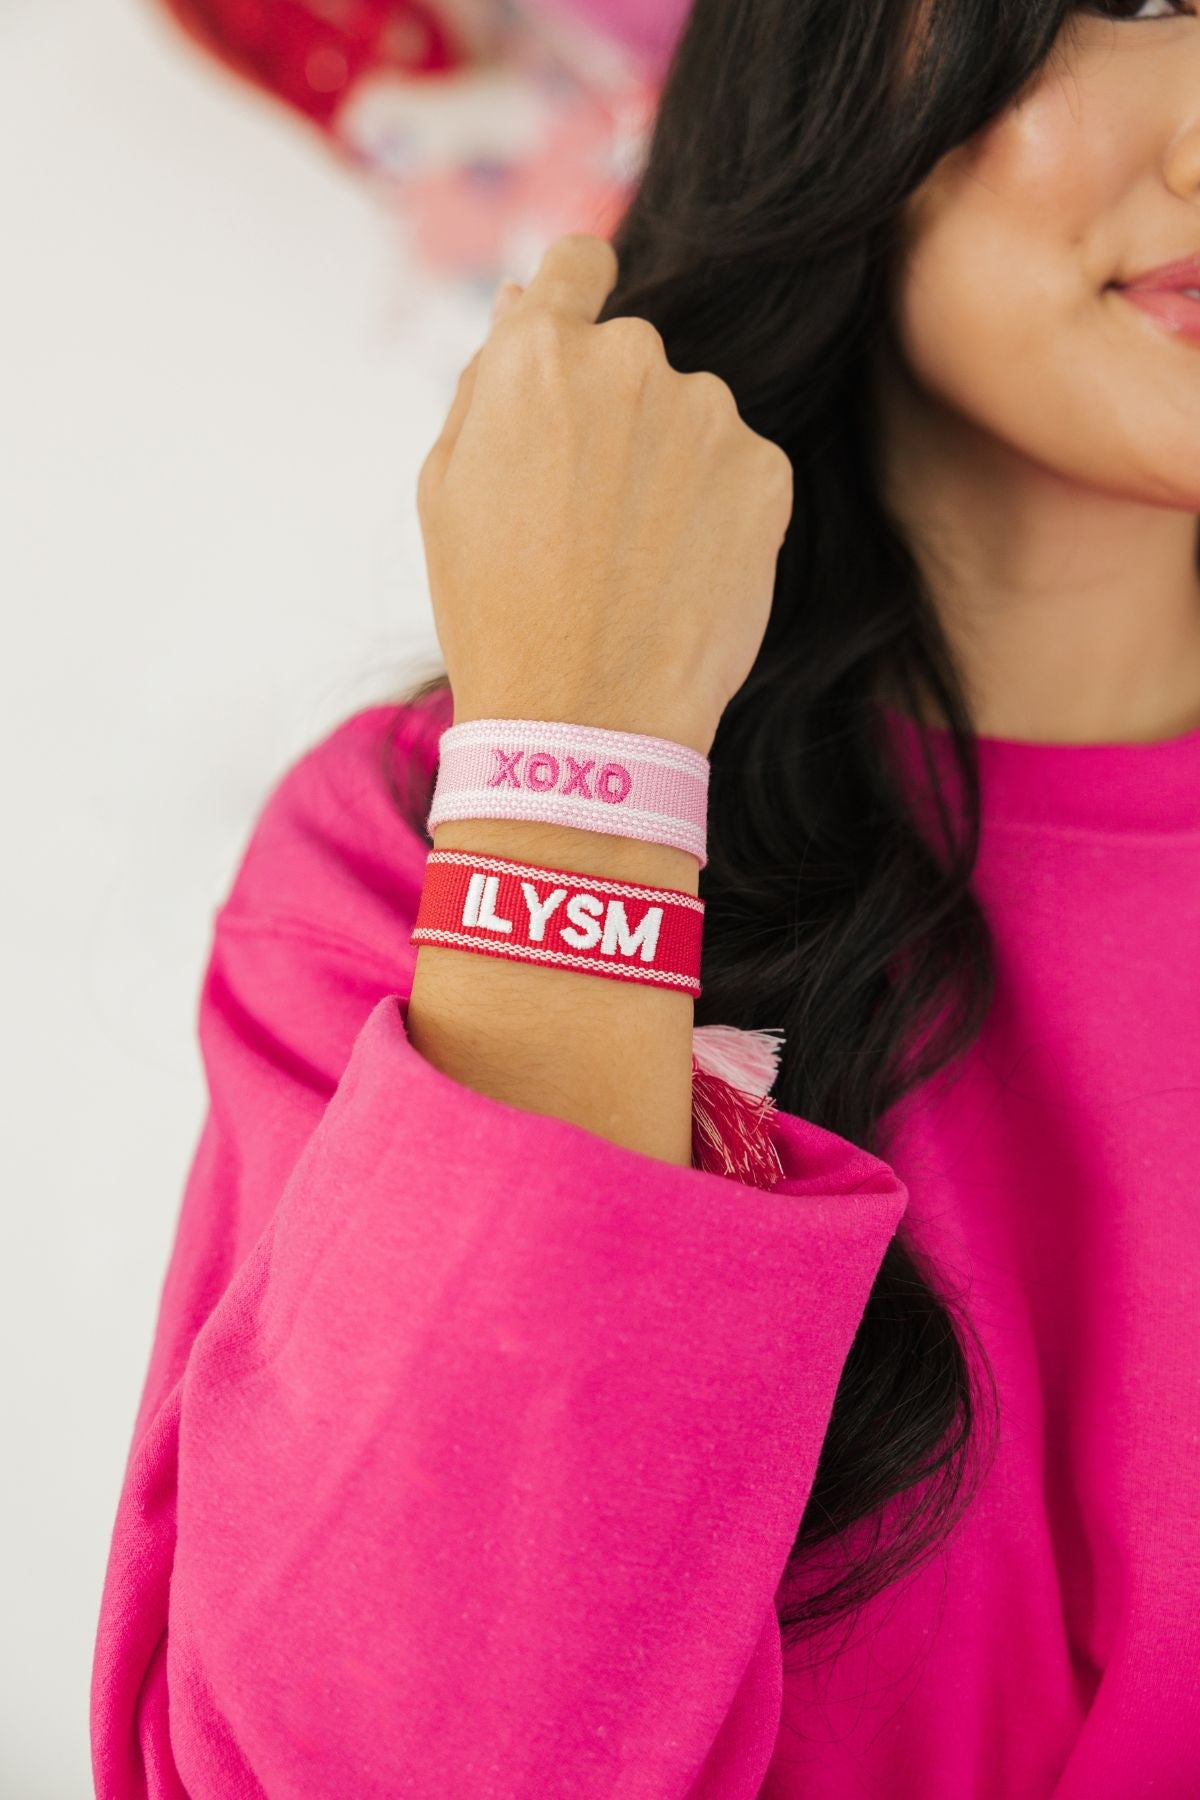 A pink bracelet and a blue bracelet are customized with embroidered names.